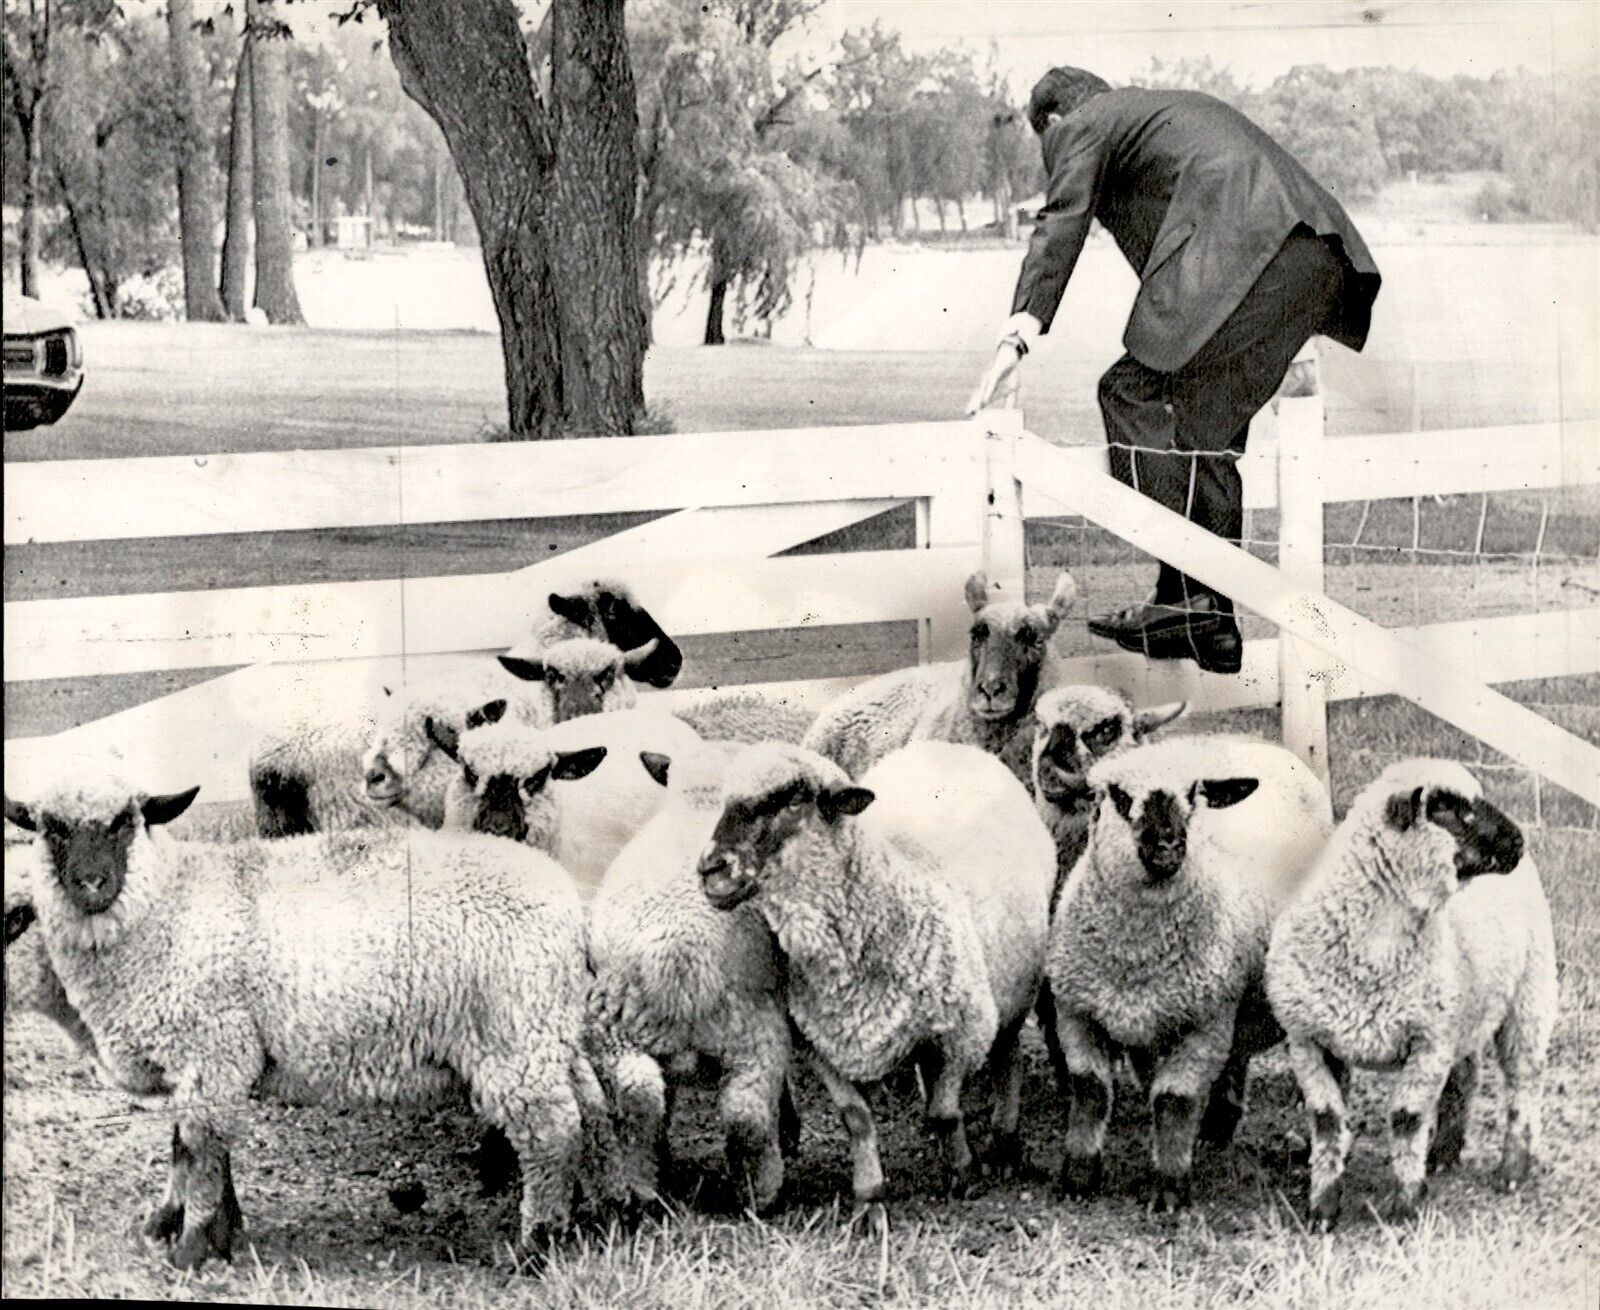 LG81 1968 Wire Photo WAVERLY MINNESOTA Sheep Miss the Action Vice Pres Humphrey